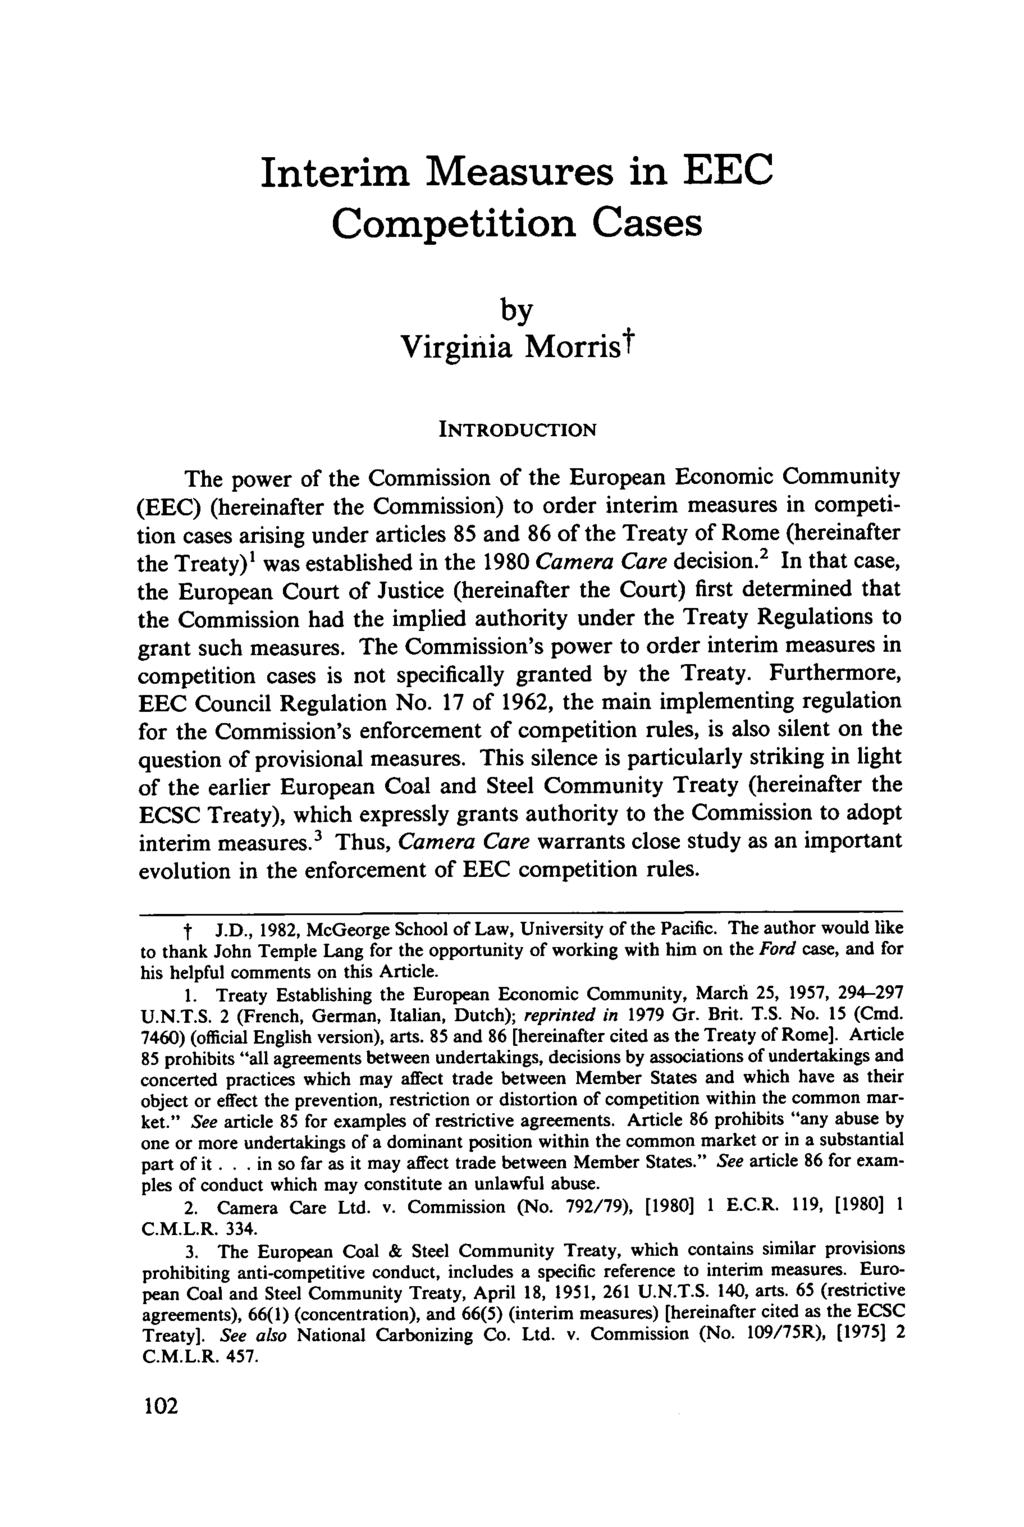 Interim Measures in EEC Competition Cases by Virginia Morrist INTRODUCTION The power of the Commission of the European Economic Community (EEC) (hereinafter the Commission) to order interim measures